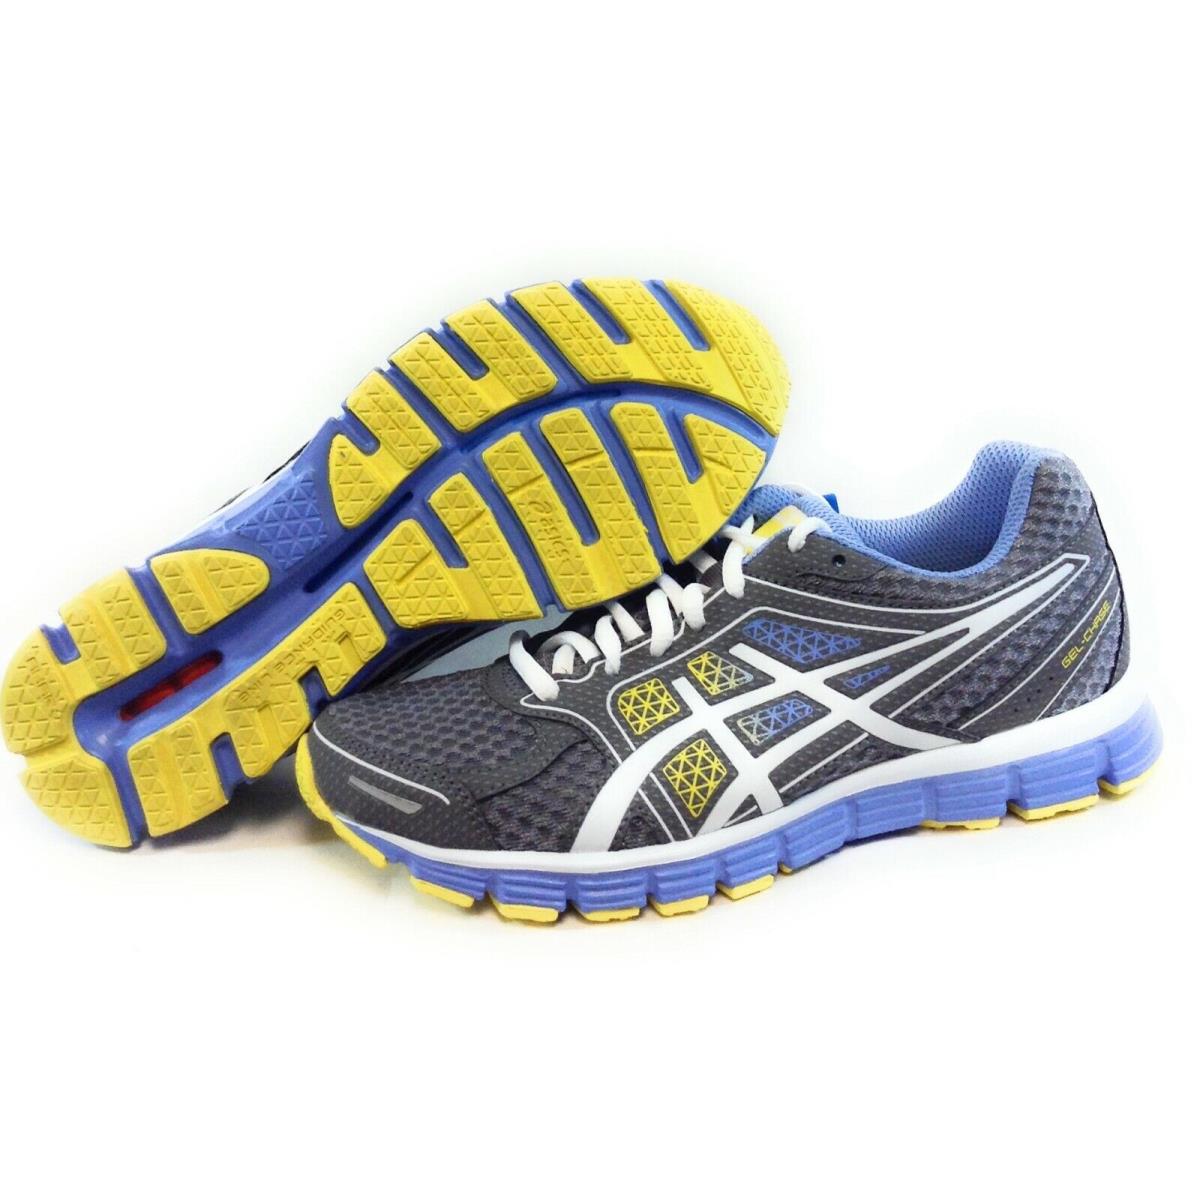 Womens Asics Gel Chase T3A7Q 9716 Titanium Blazing Yellow Blue Sneakers Shoes